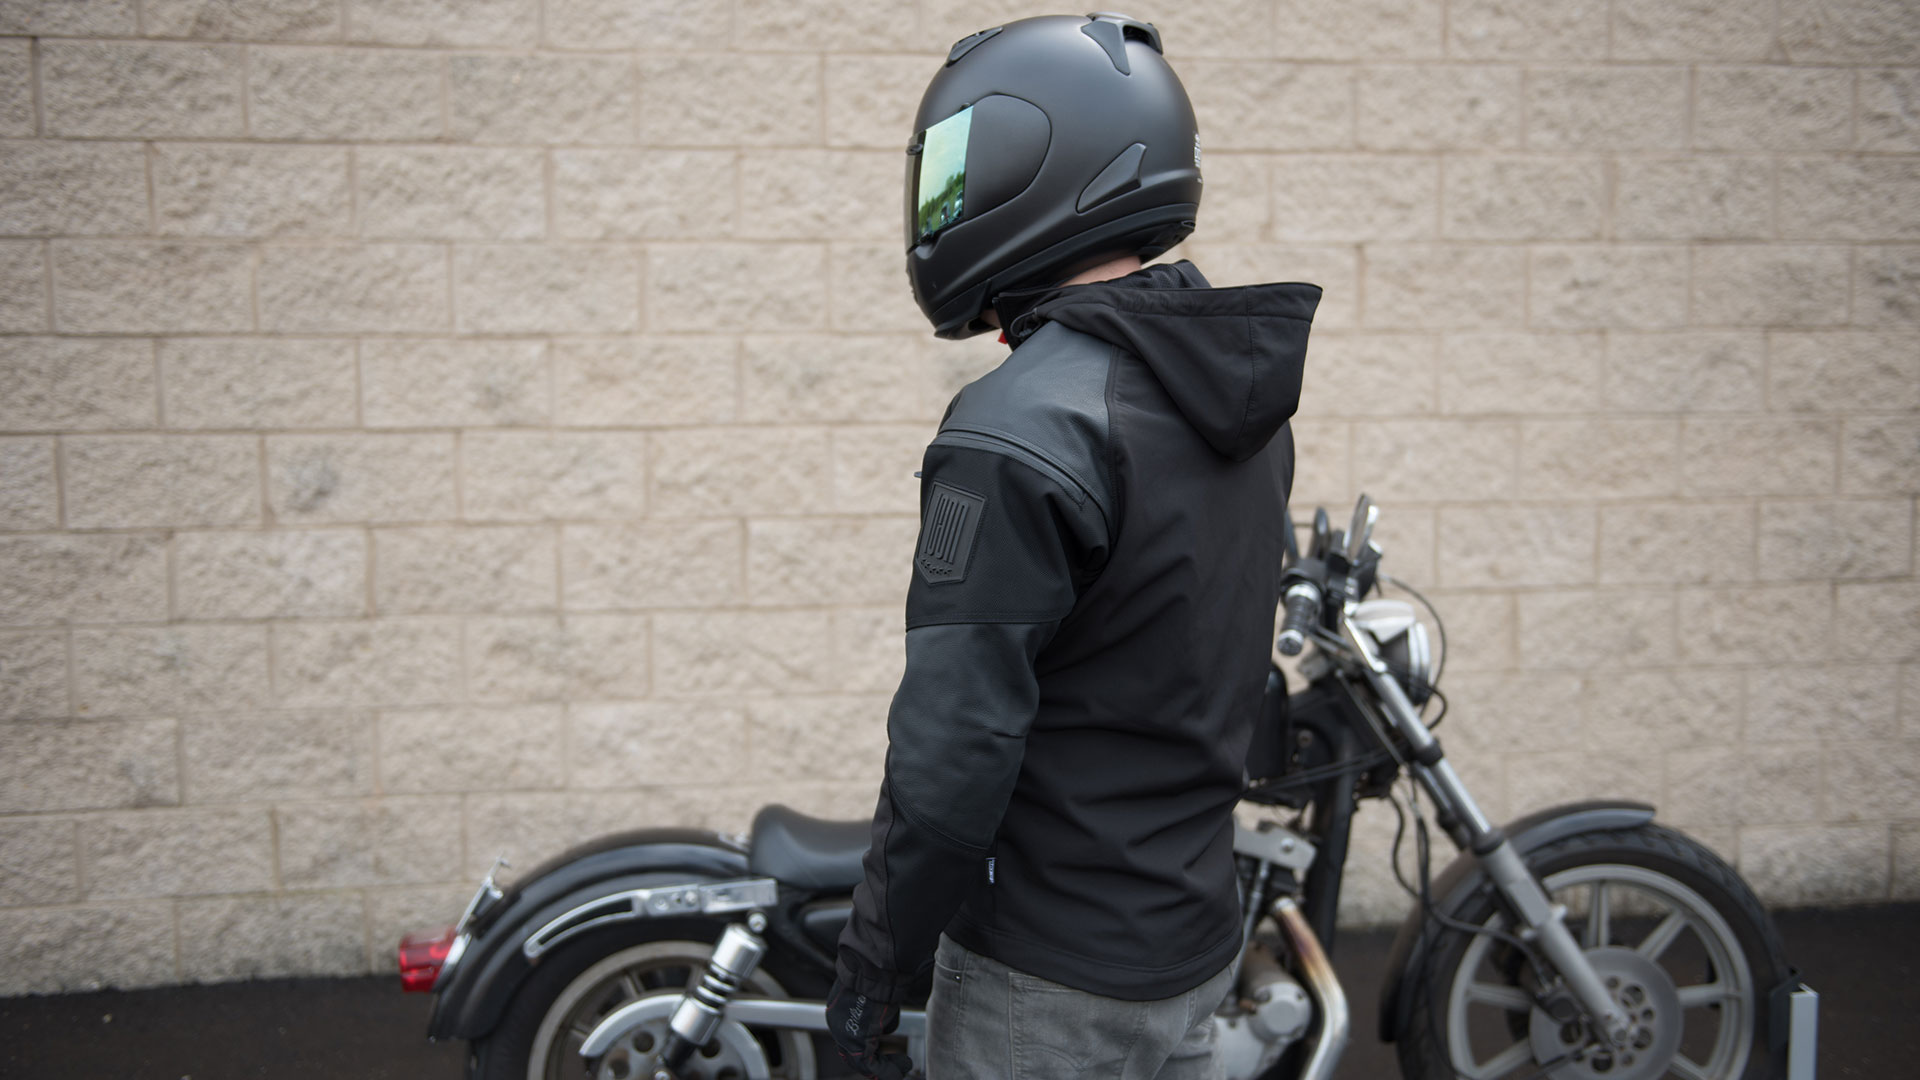 Icon 1000 Basehawk Jacket Review - Hooded and Packed with Features 